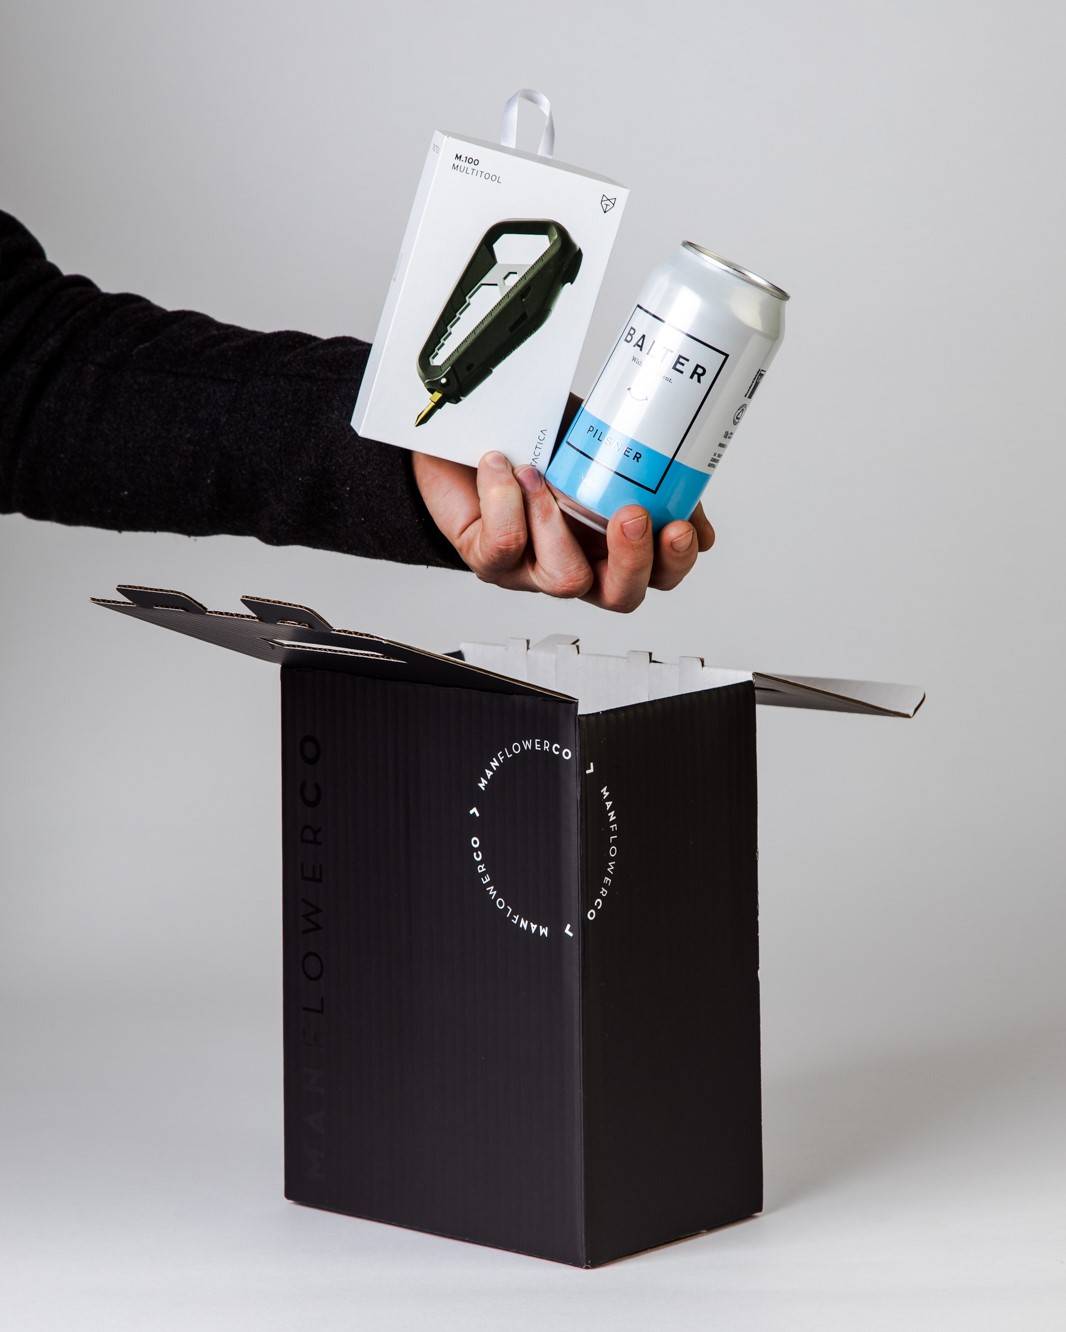 Tactica Tool + Beer, part of Manflower Co's range of Father's Day Gifts.